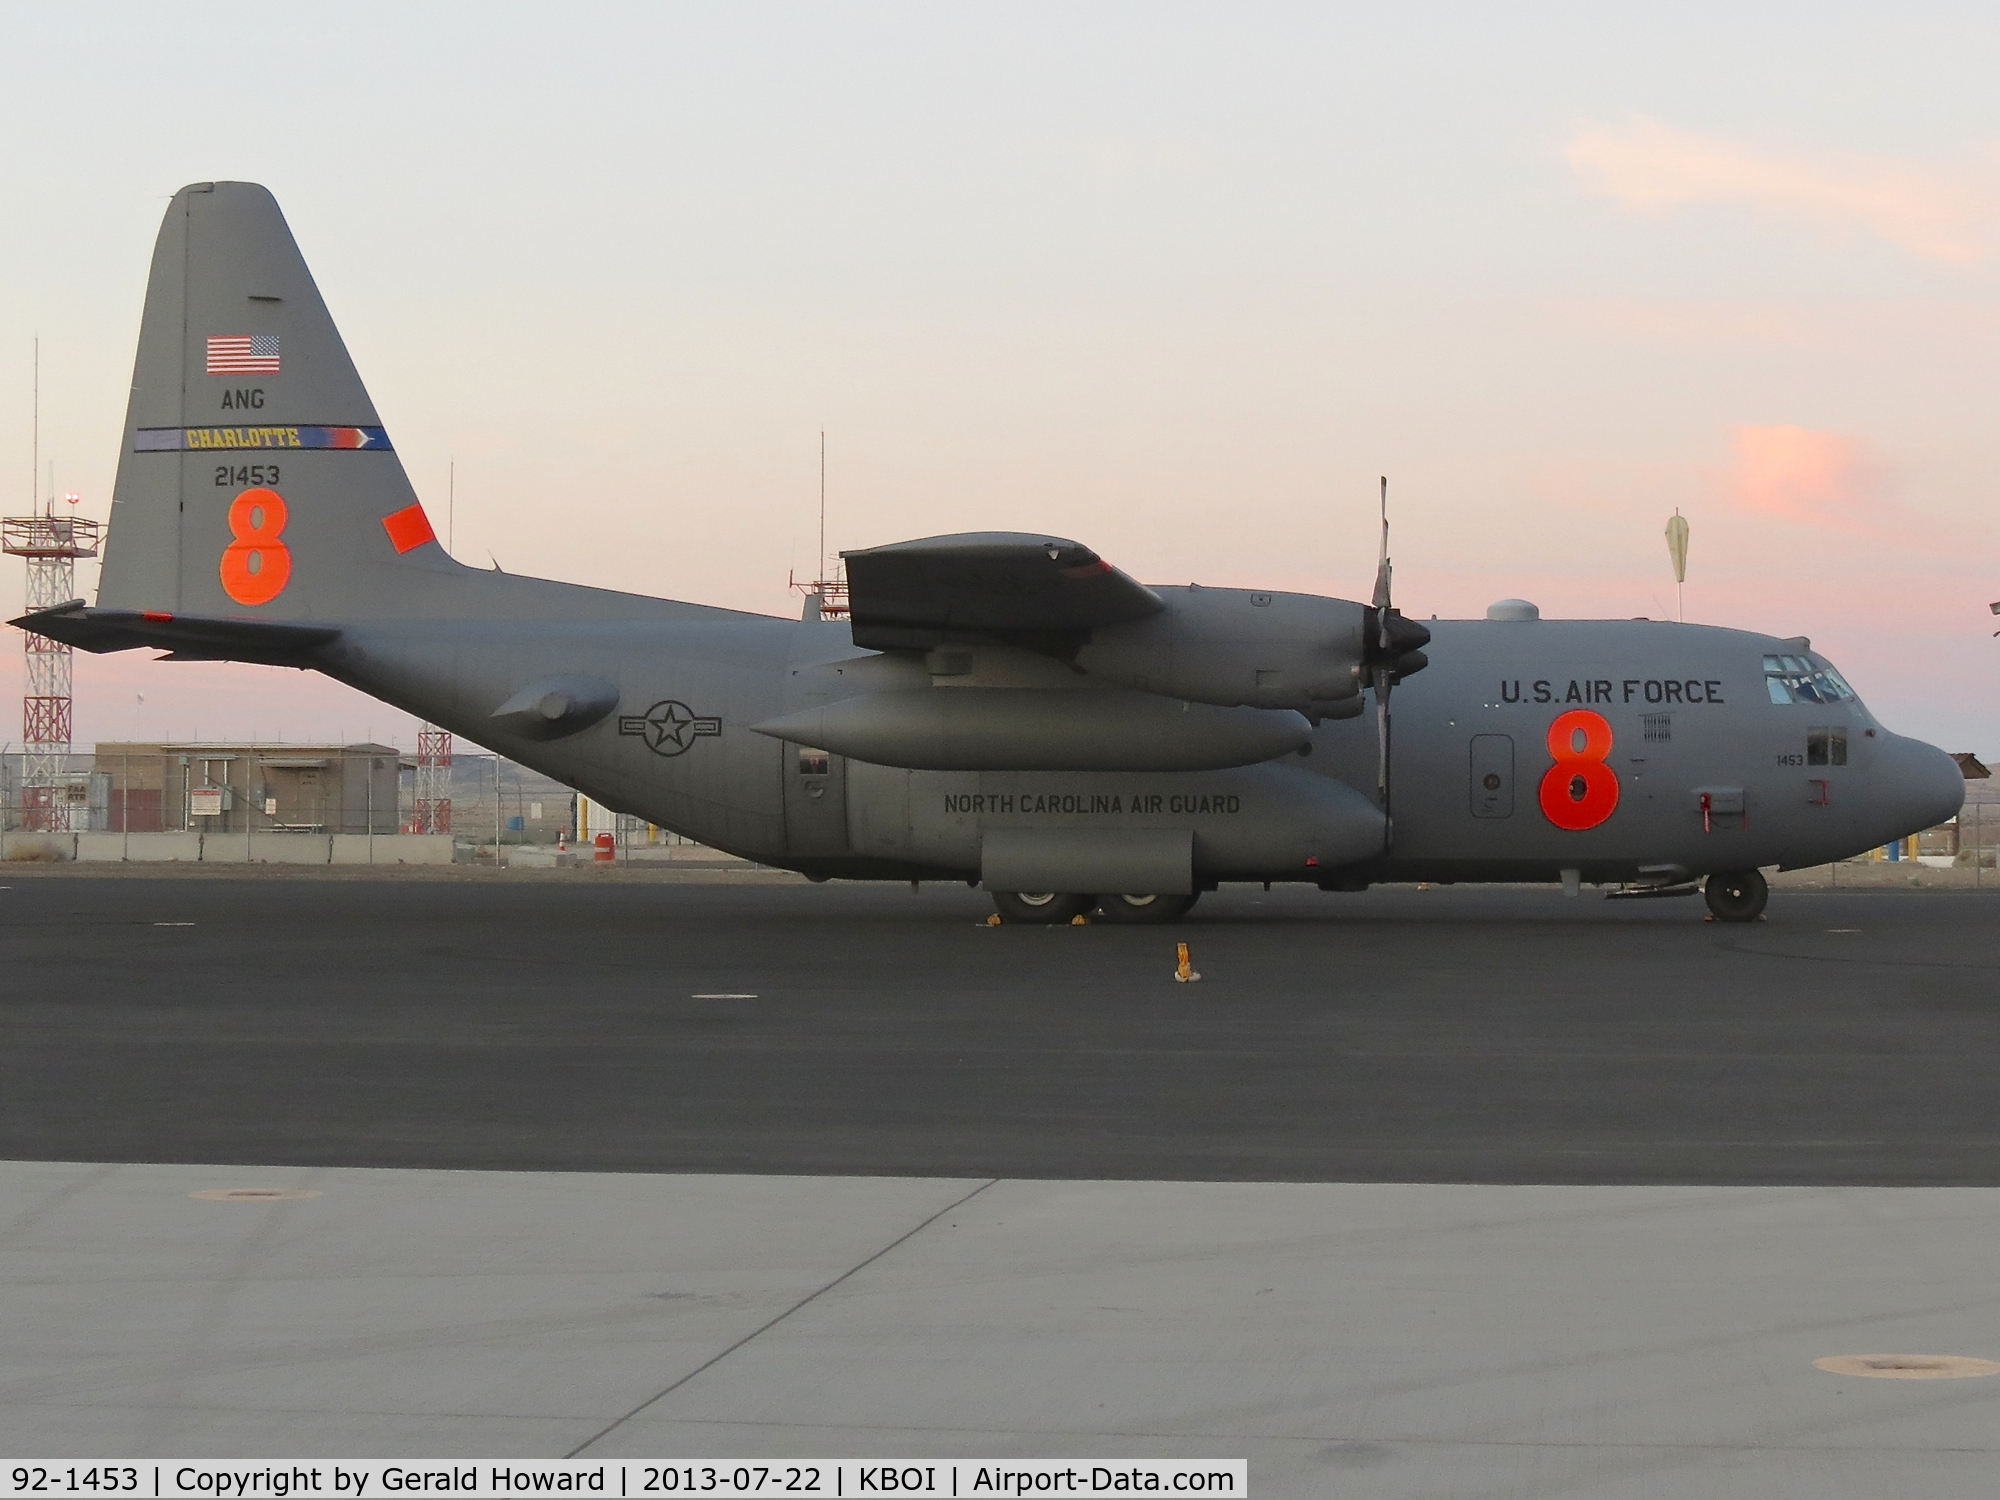 92-1453, 1992 Lockheed C-130H Hercules C/N 382-5330, Parked on the NIFC ramp. MAFFS #8. 145th Airlift Wing, NC ANG. Early morning.